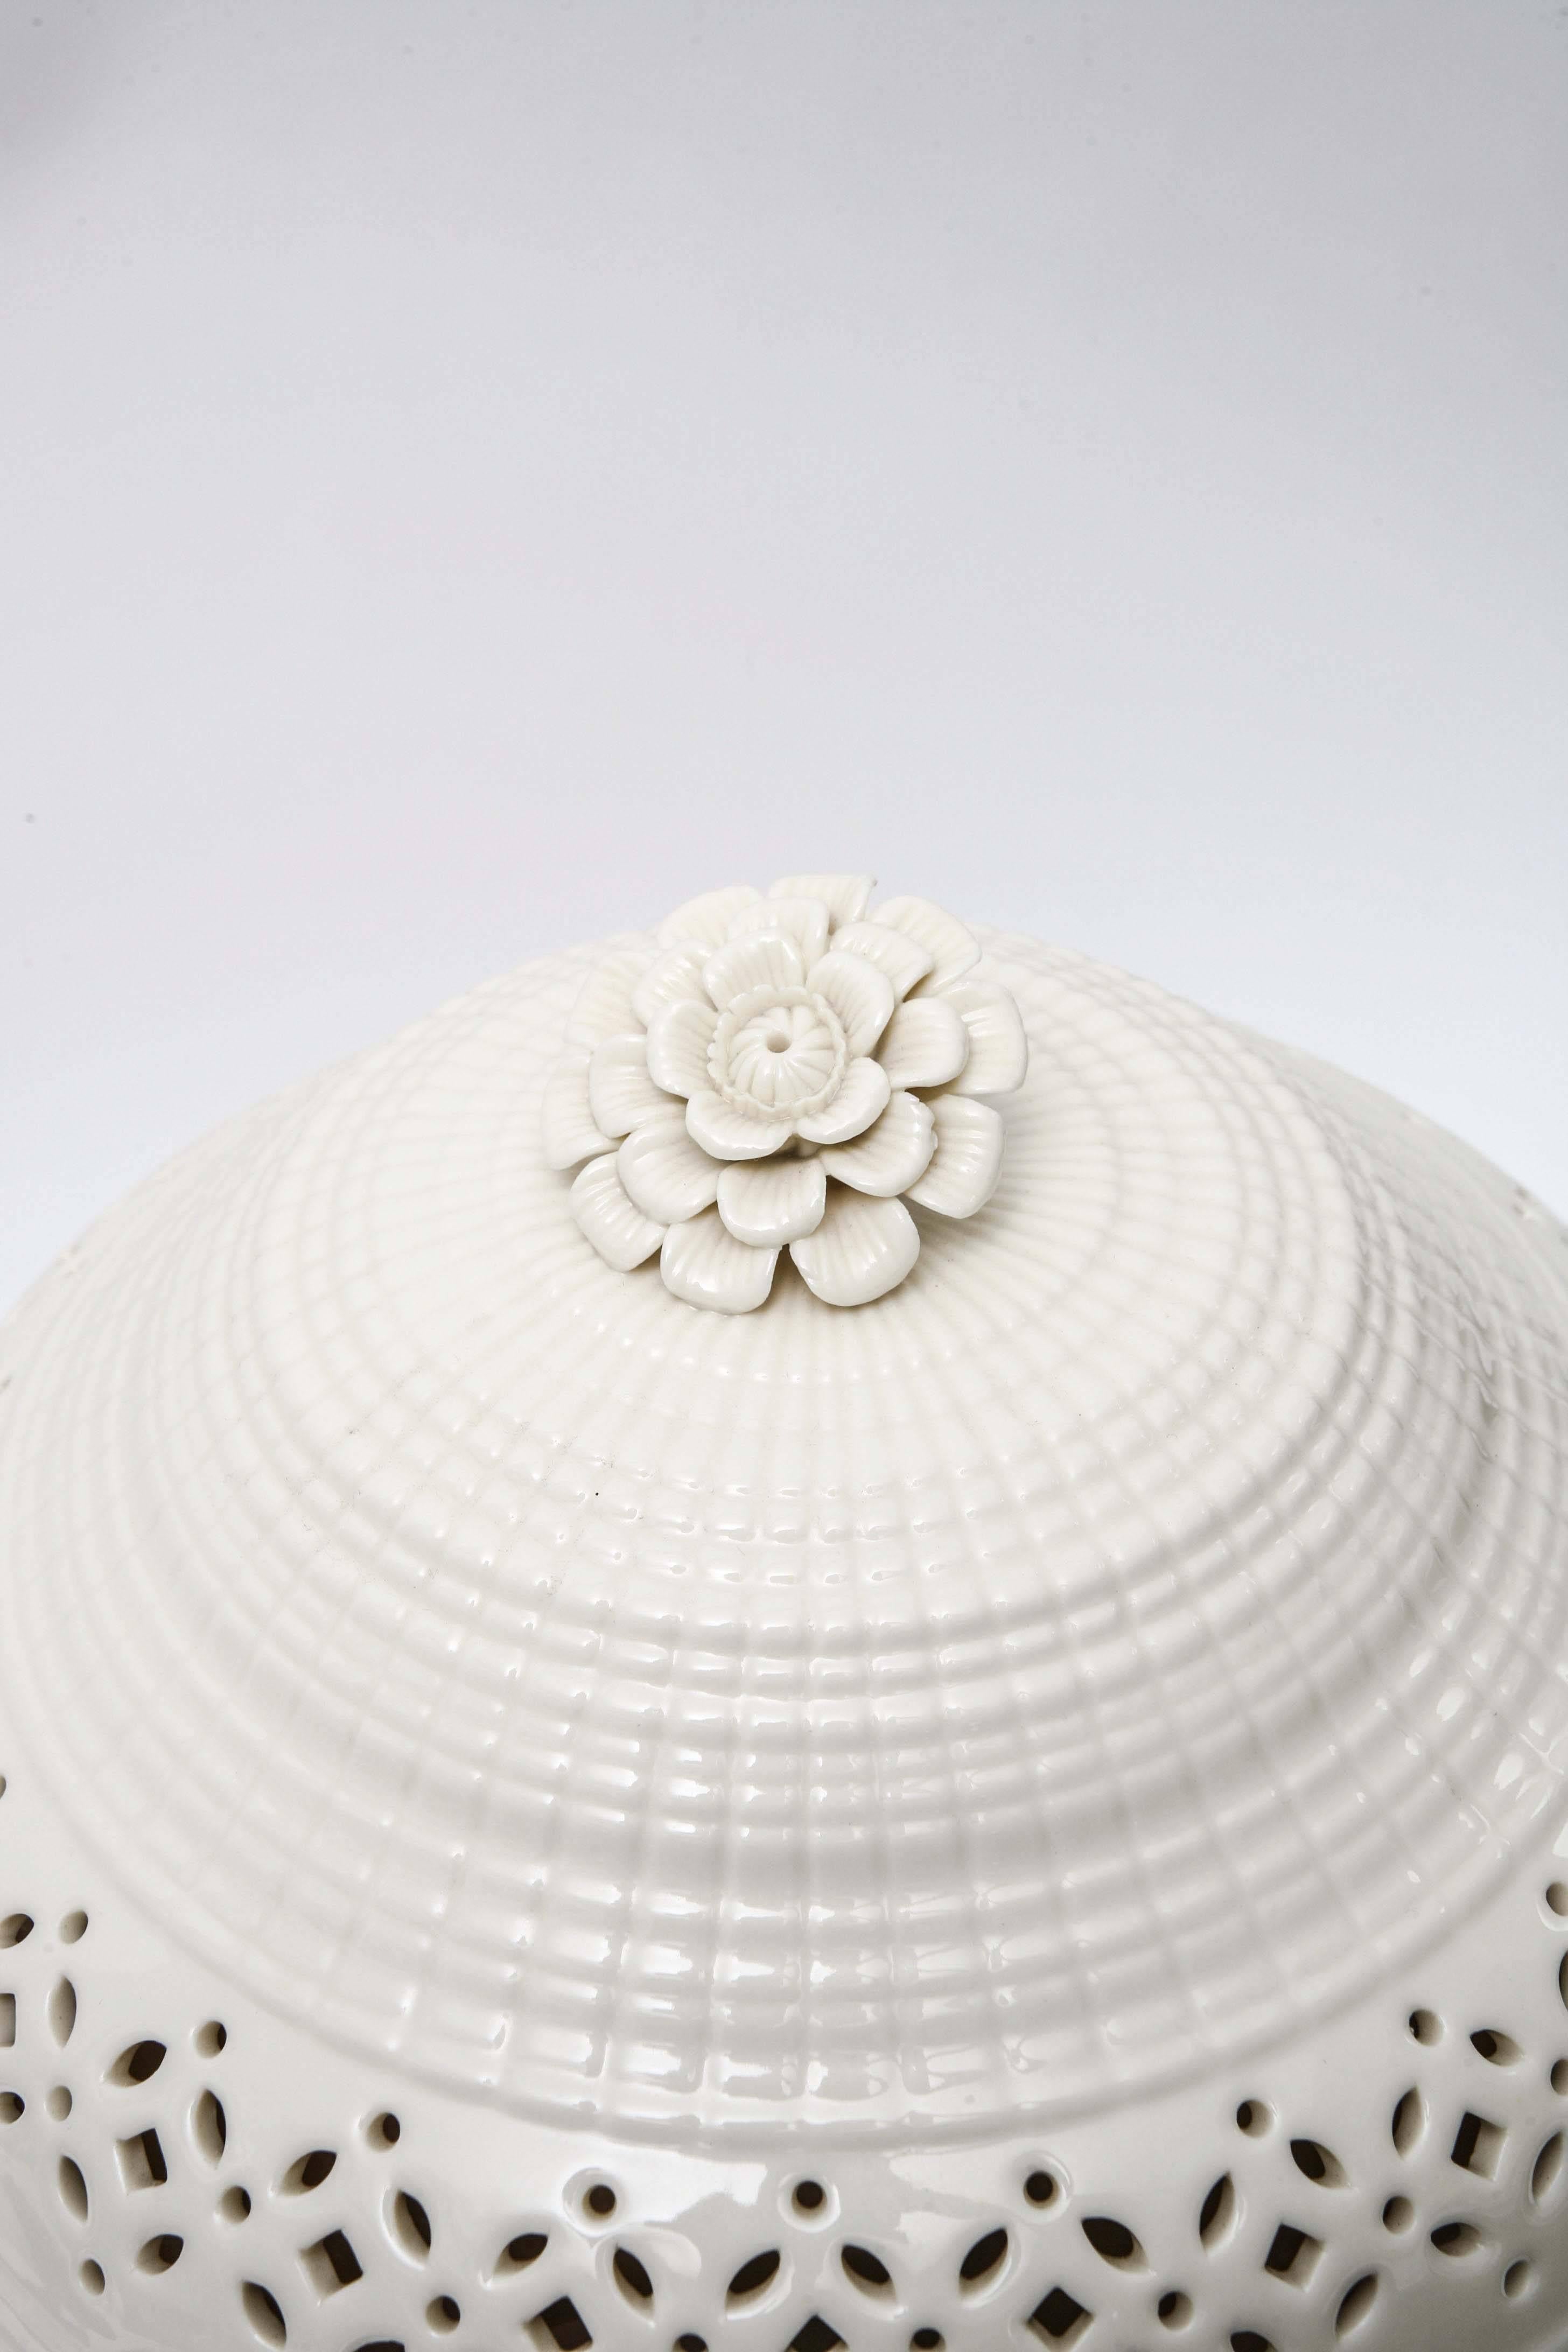 Late 20th Century Cream Ware Tureen, Large and Impressive, Flower Finial, Undertray and Ladle